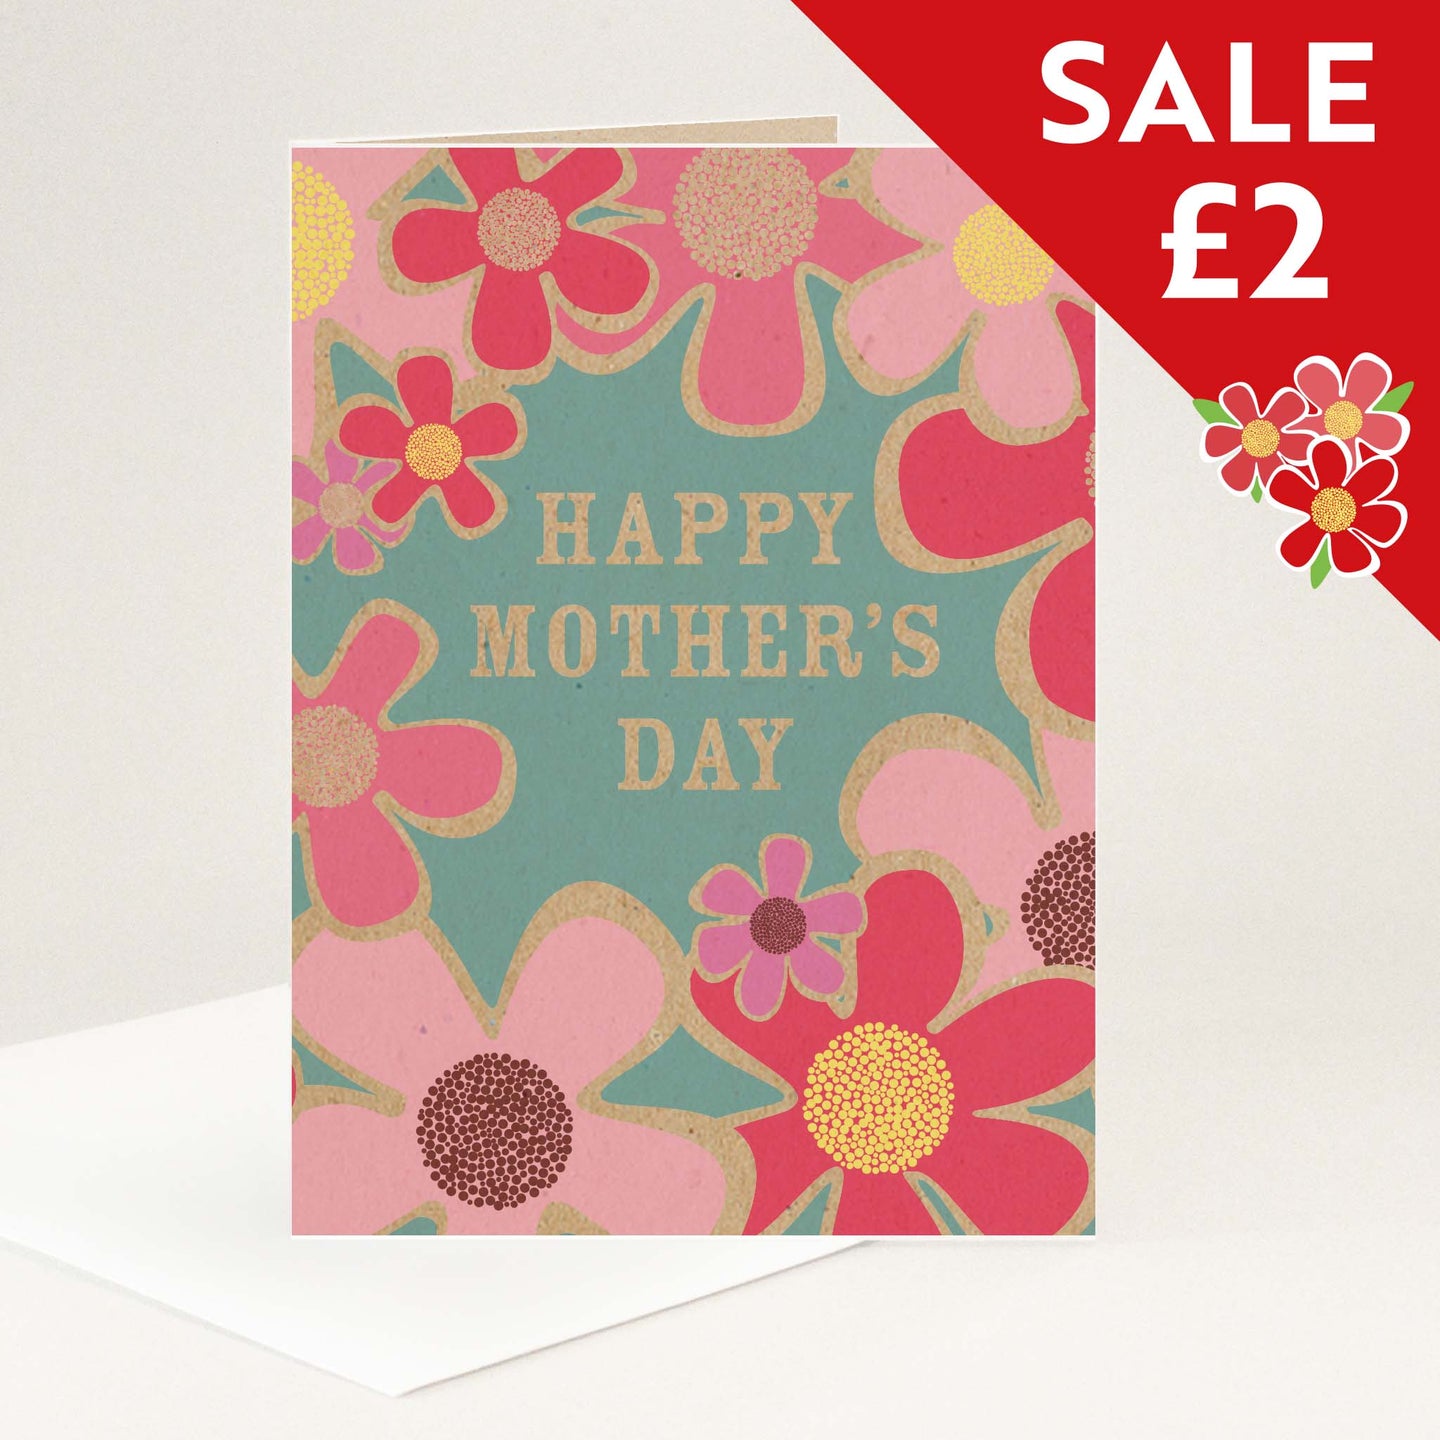 Happy Mother's Day brightly coloured flowers on a recycled Kraft card for sale at £2